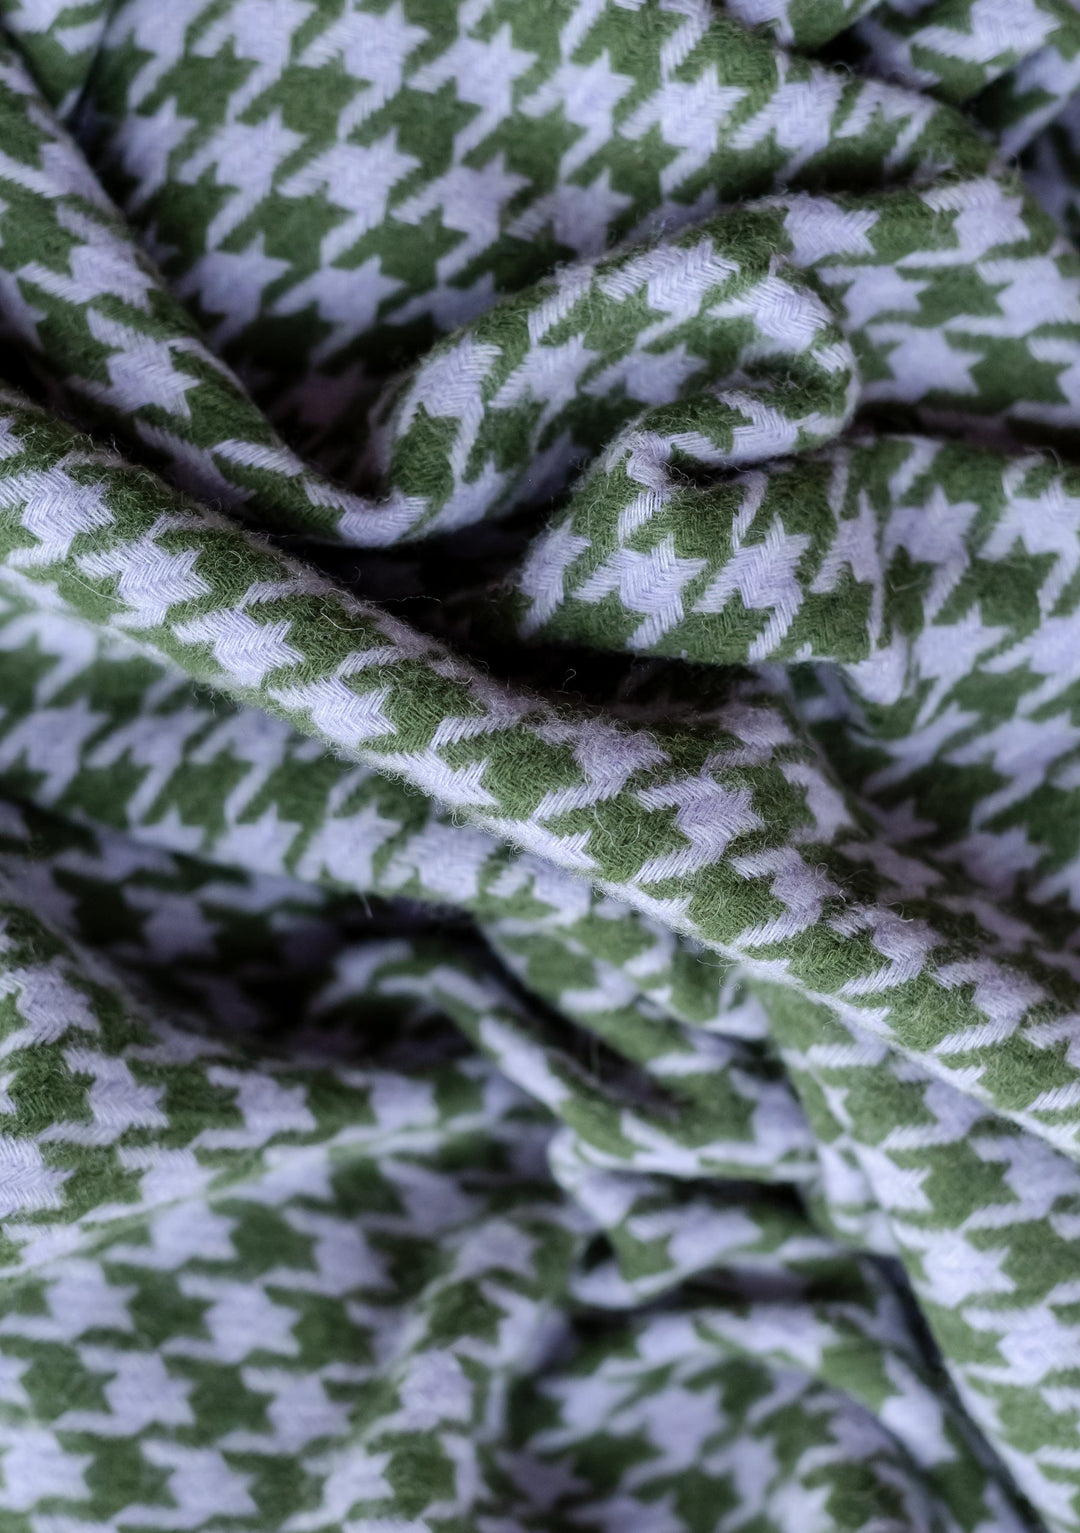 Men's Lambswool Scarf in Olive Houndstooth